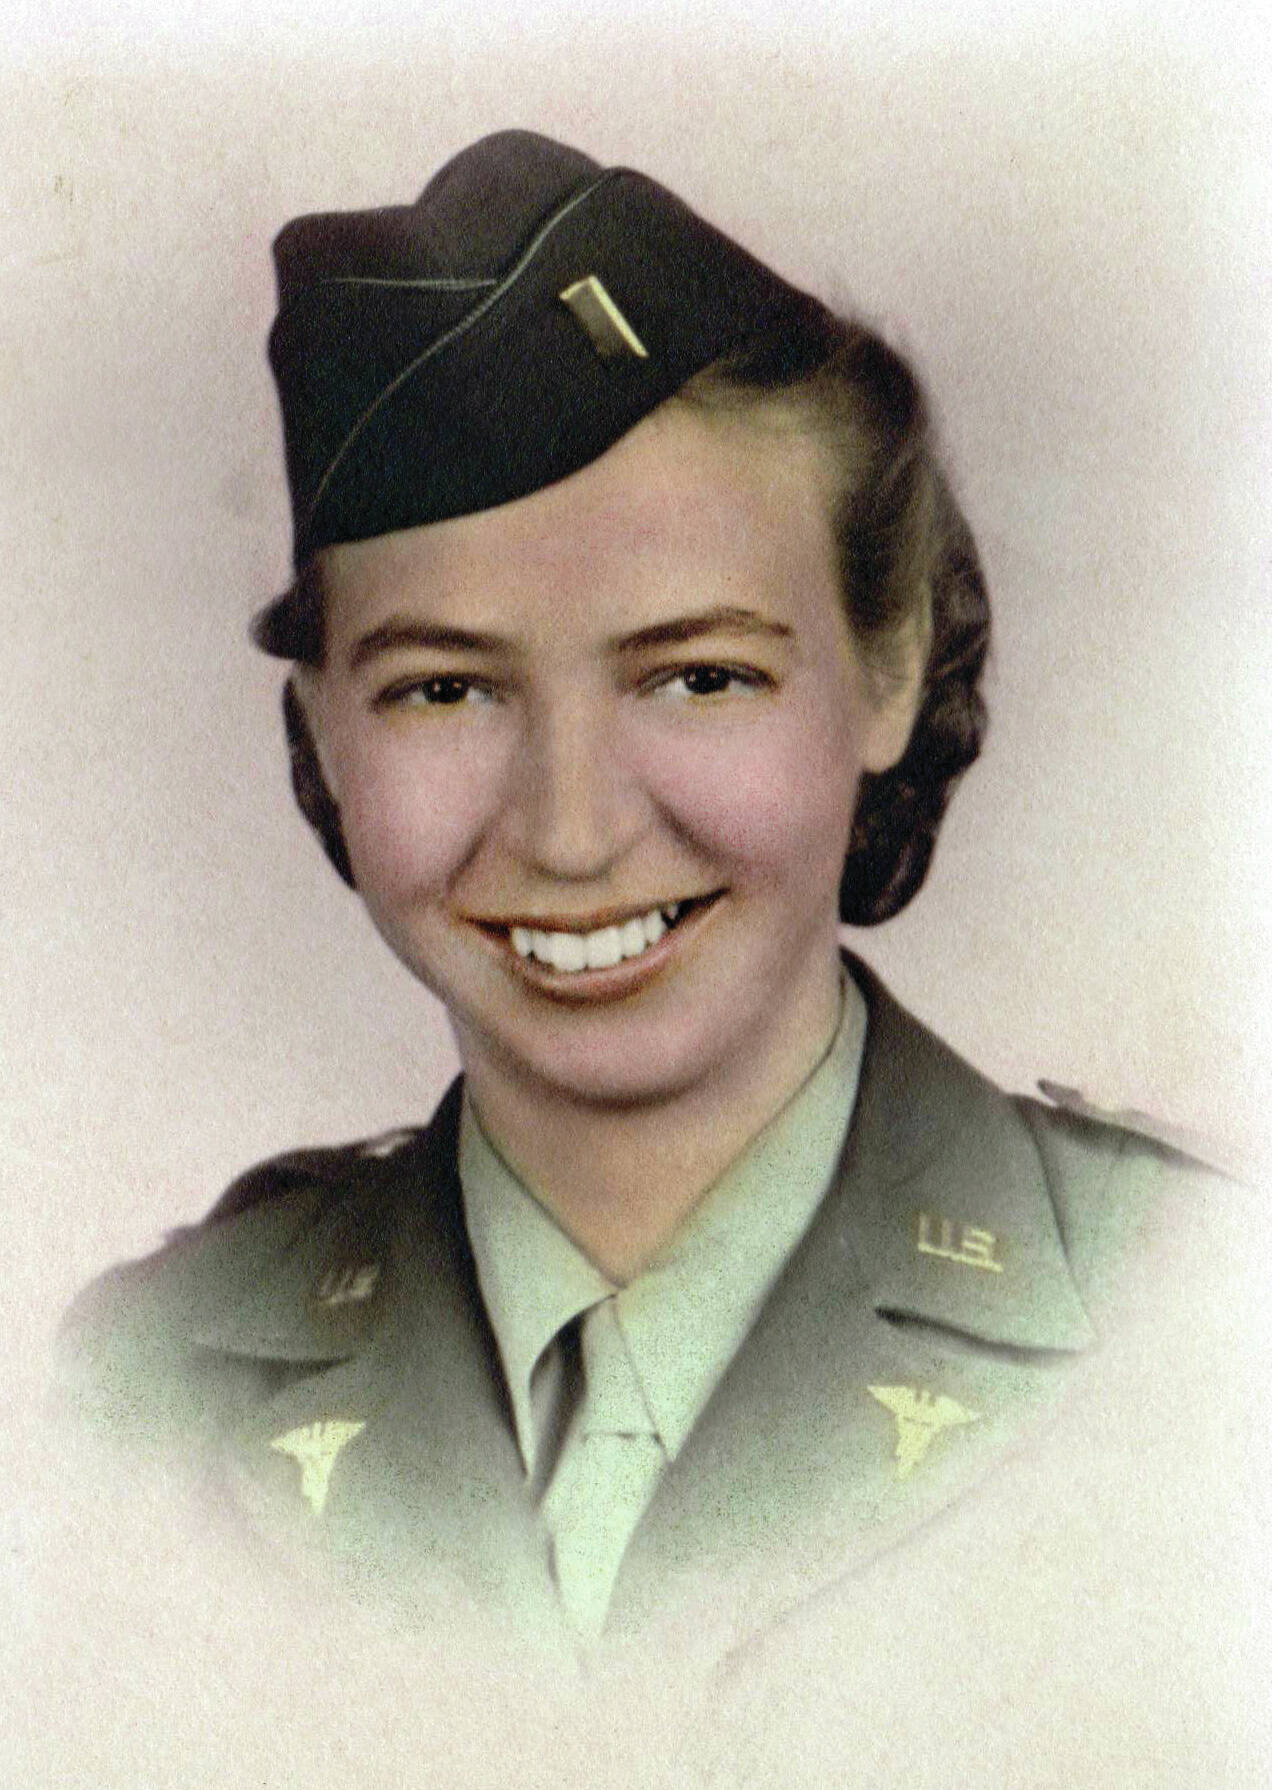 Photo courtesy of Mary Butts on familysearch.org
Like her husband Rex Hanks, Irmgard (Matz) Hanks also served in the U.S. Army Medical Corps during World War II.